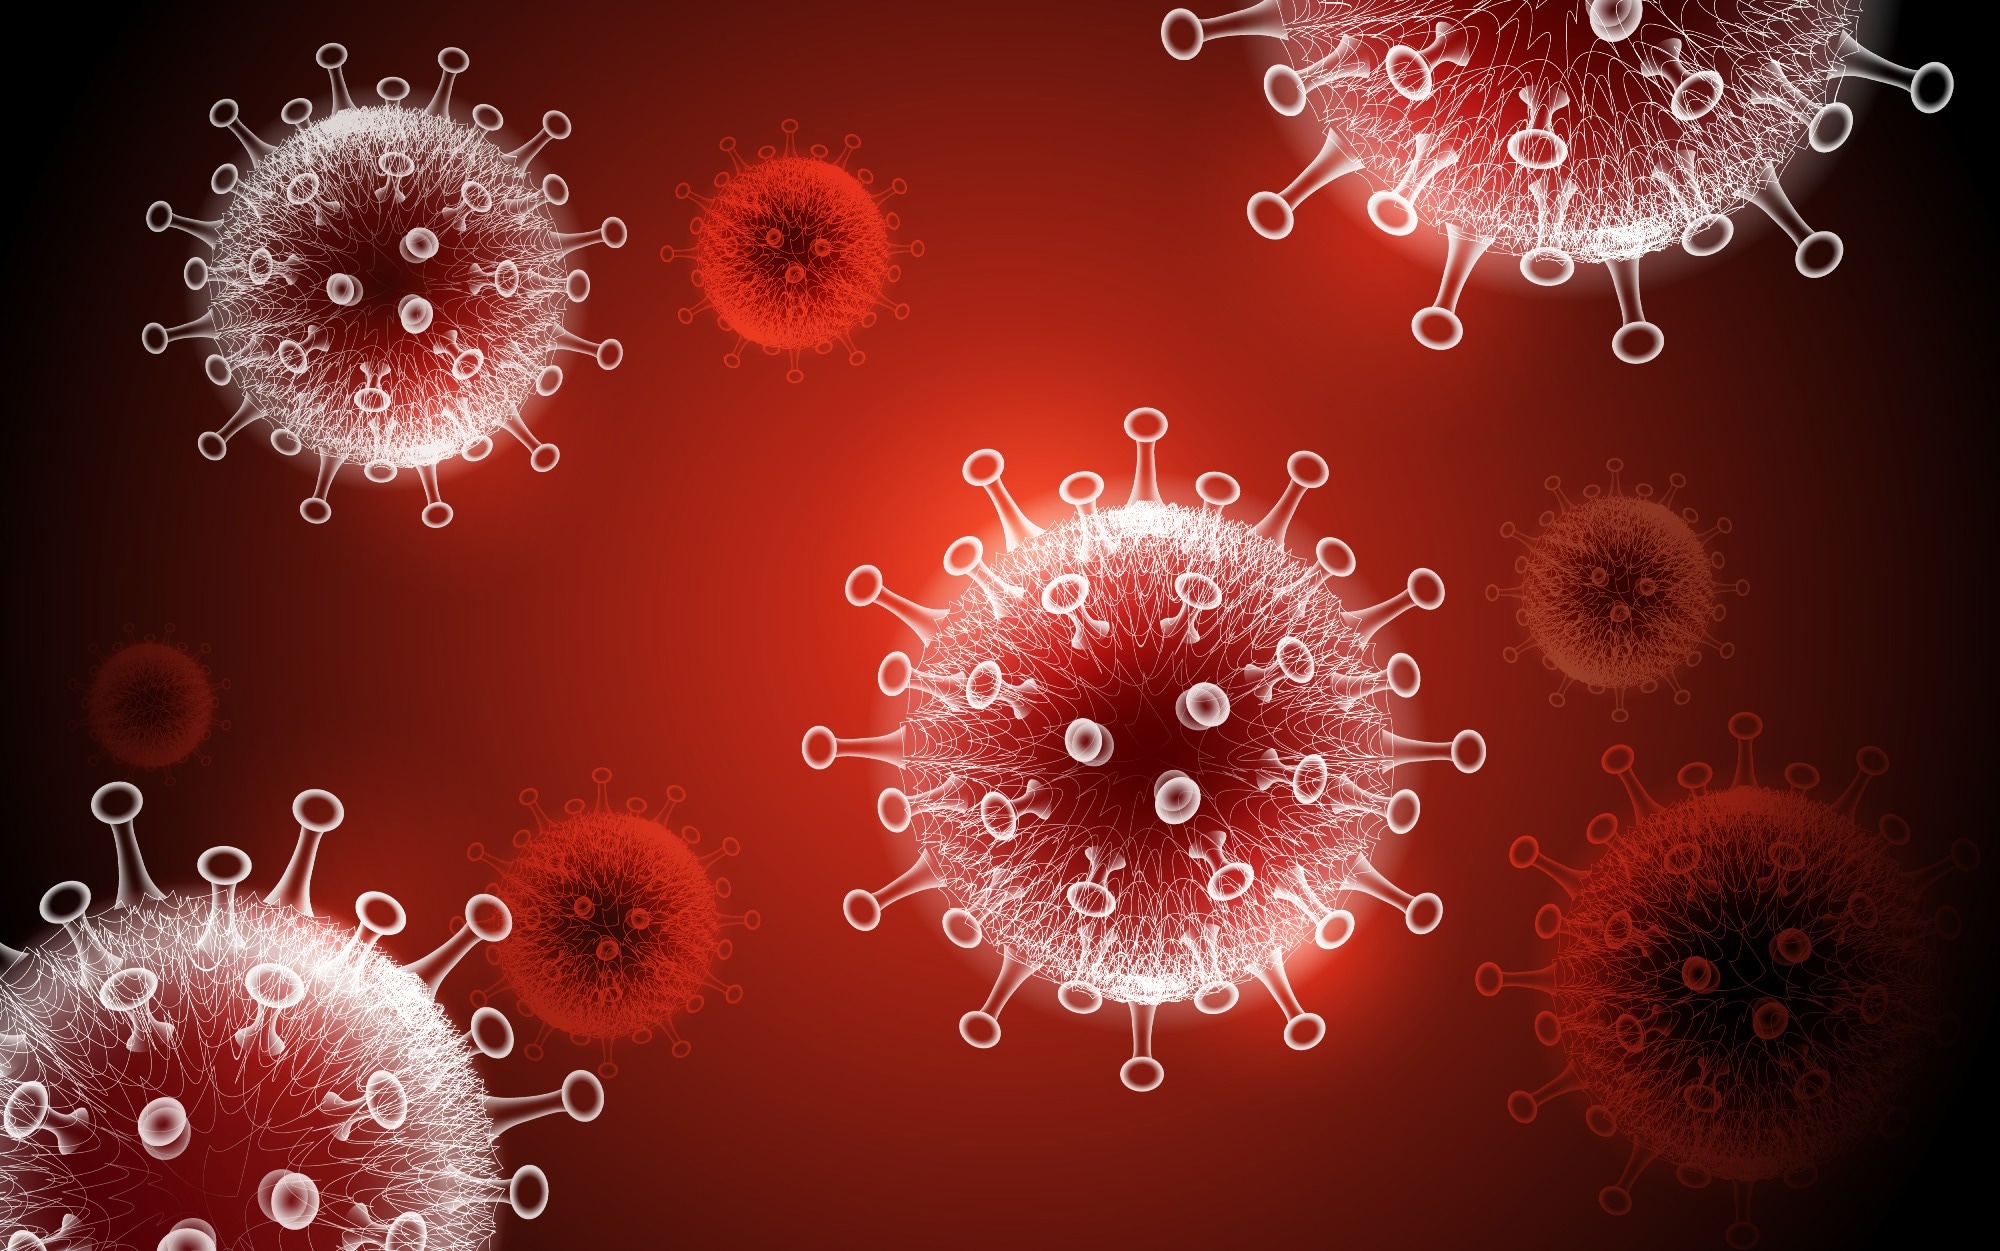 Study: Synthesis and Evaluation of a Silver Nanoparticle/Polyurethane Composite That Exhibits Antiviral Activity against SARS-CoV-2. Image Credit: CKA/Shutterstock